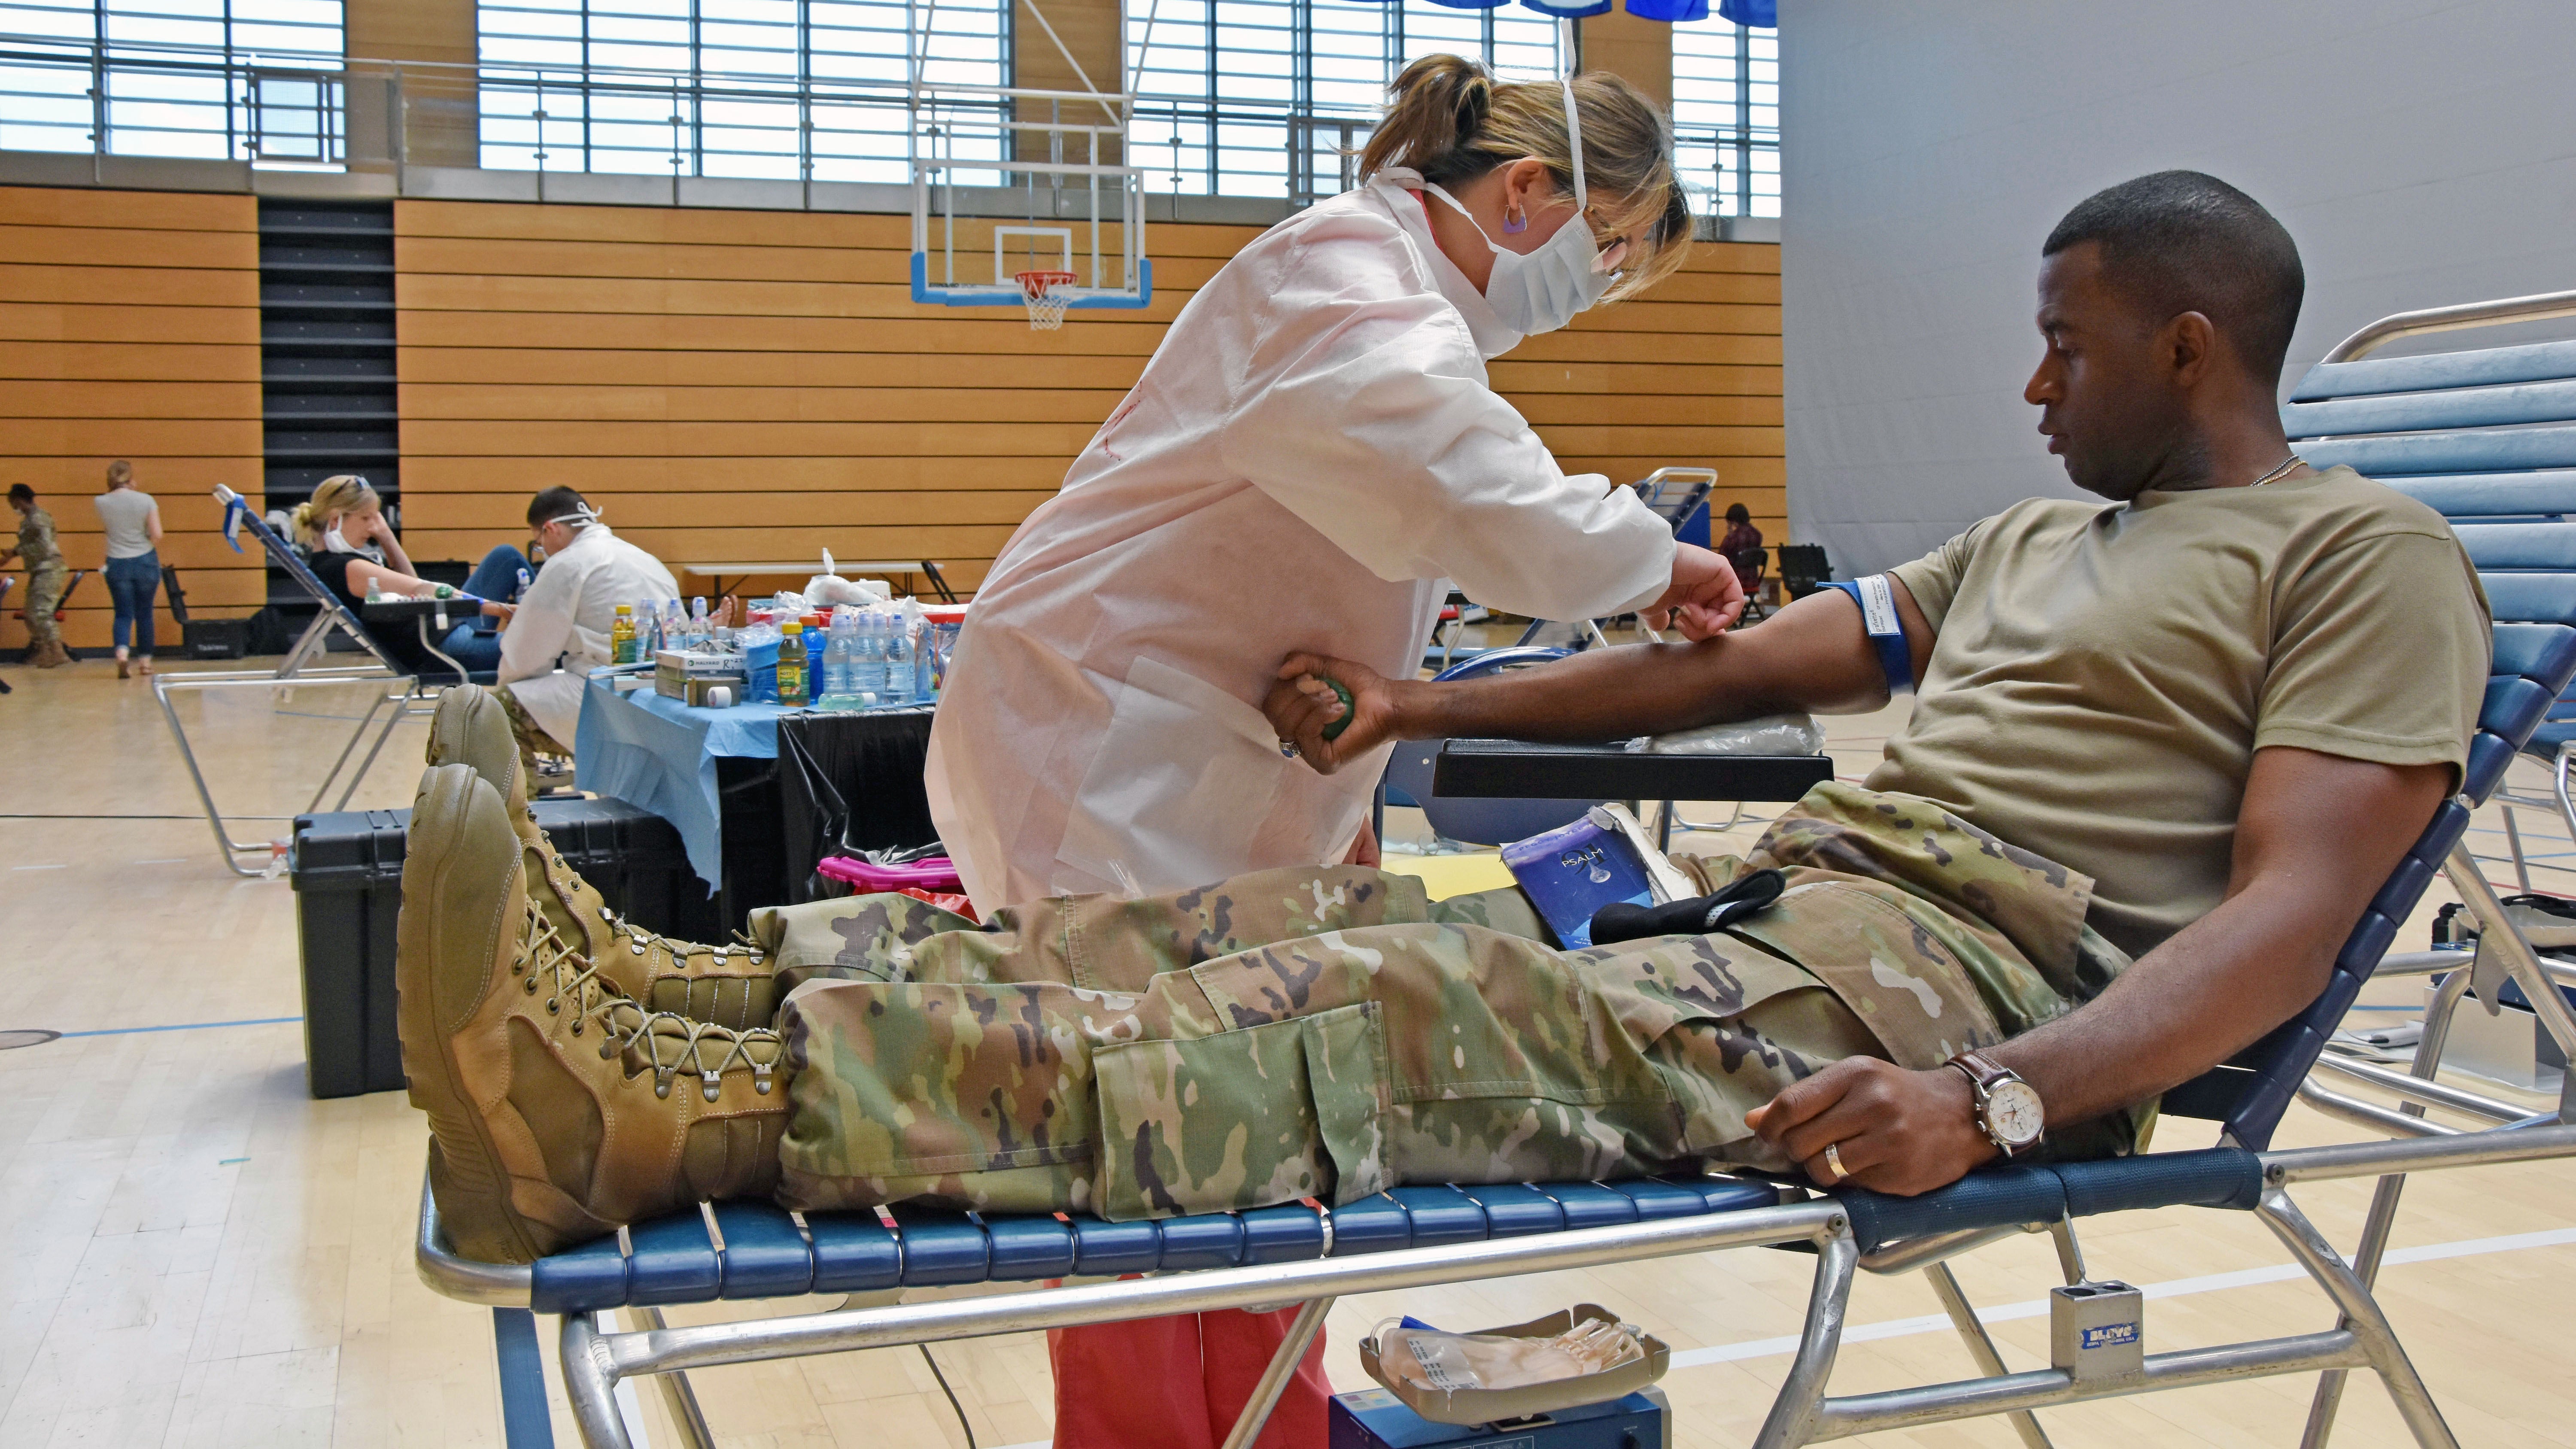 Soldier giving blood